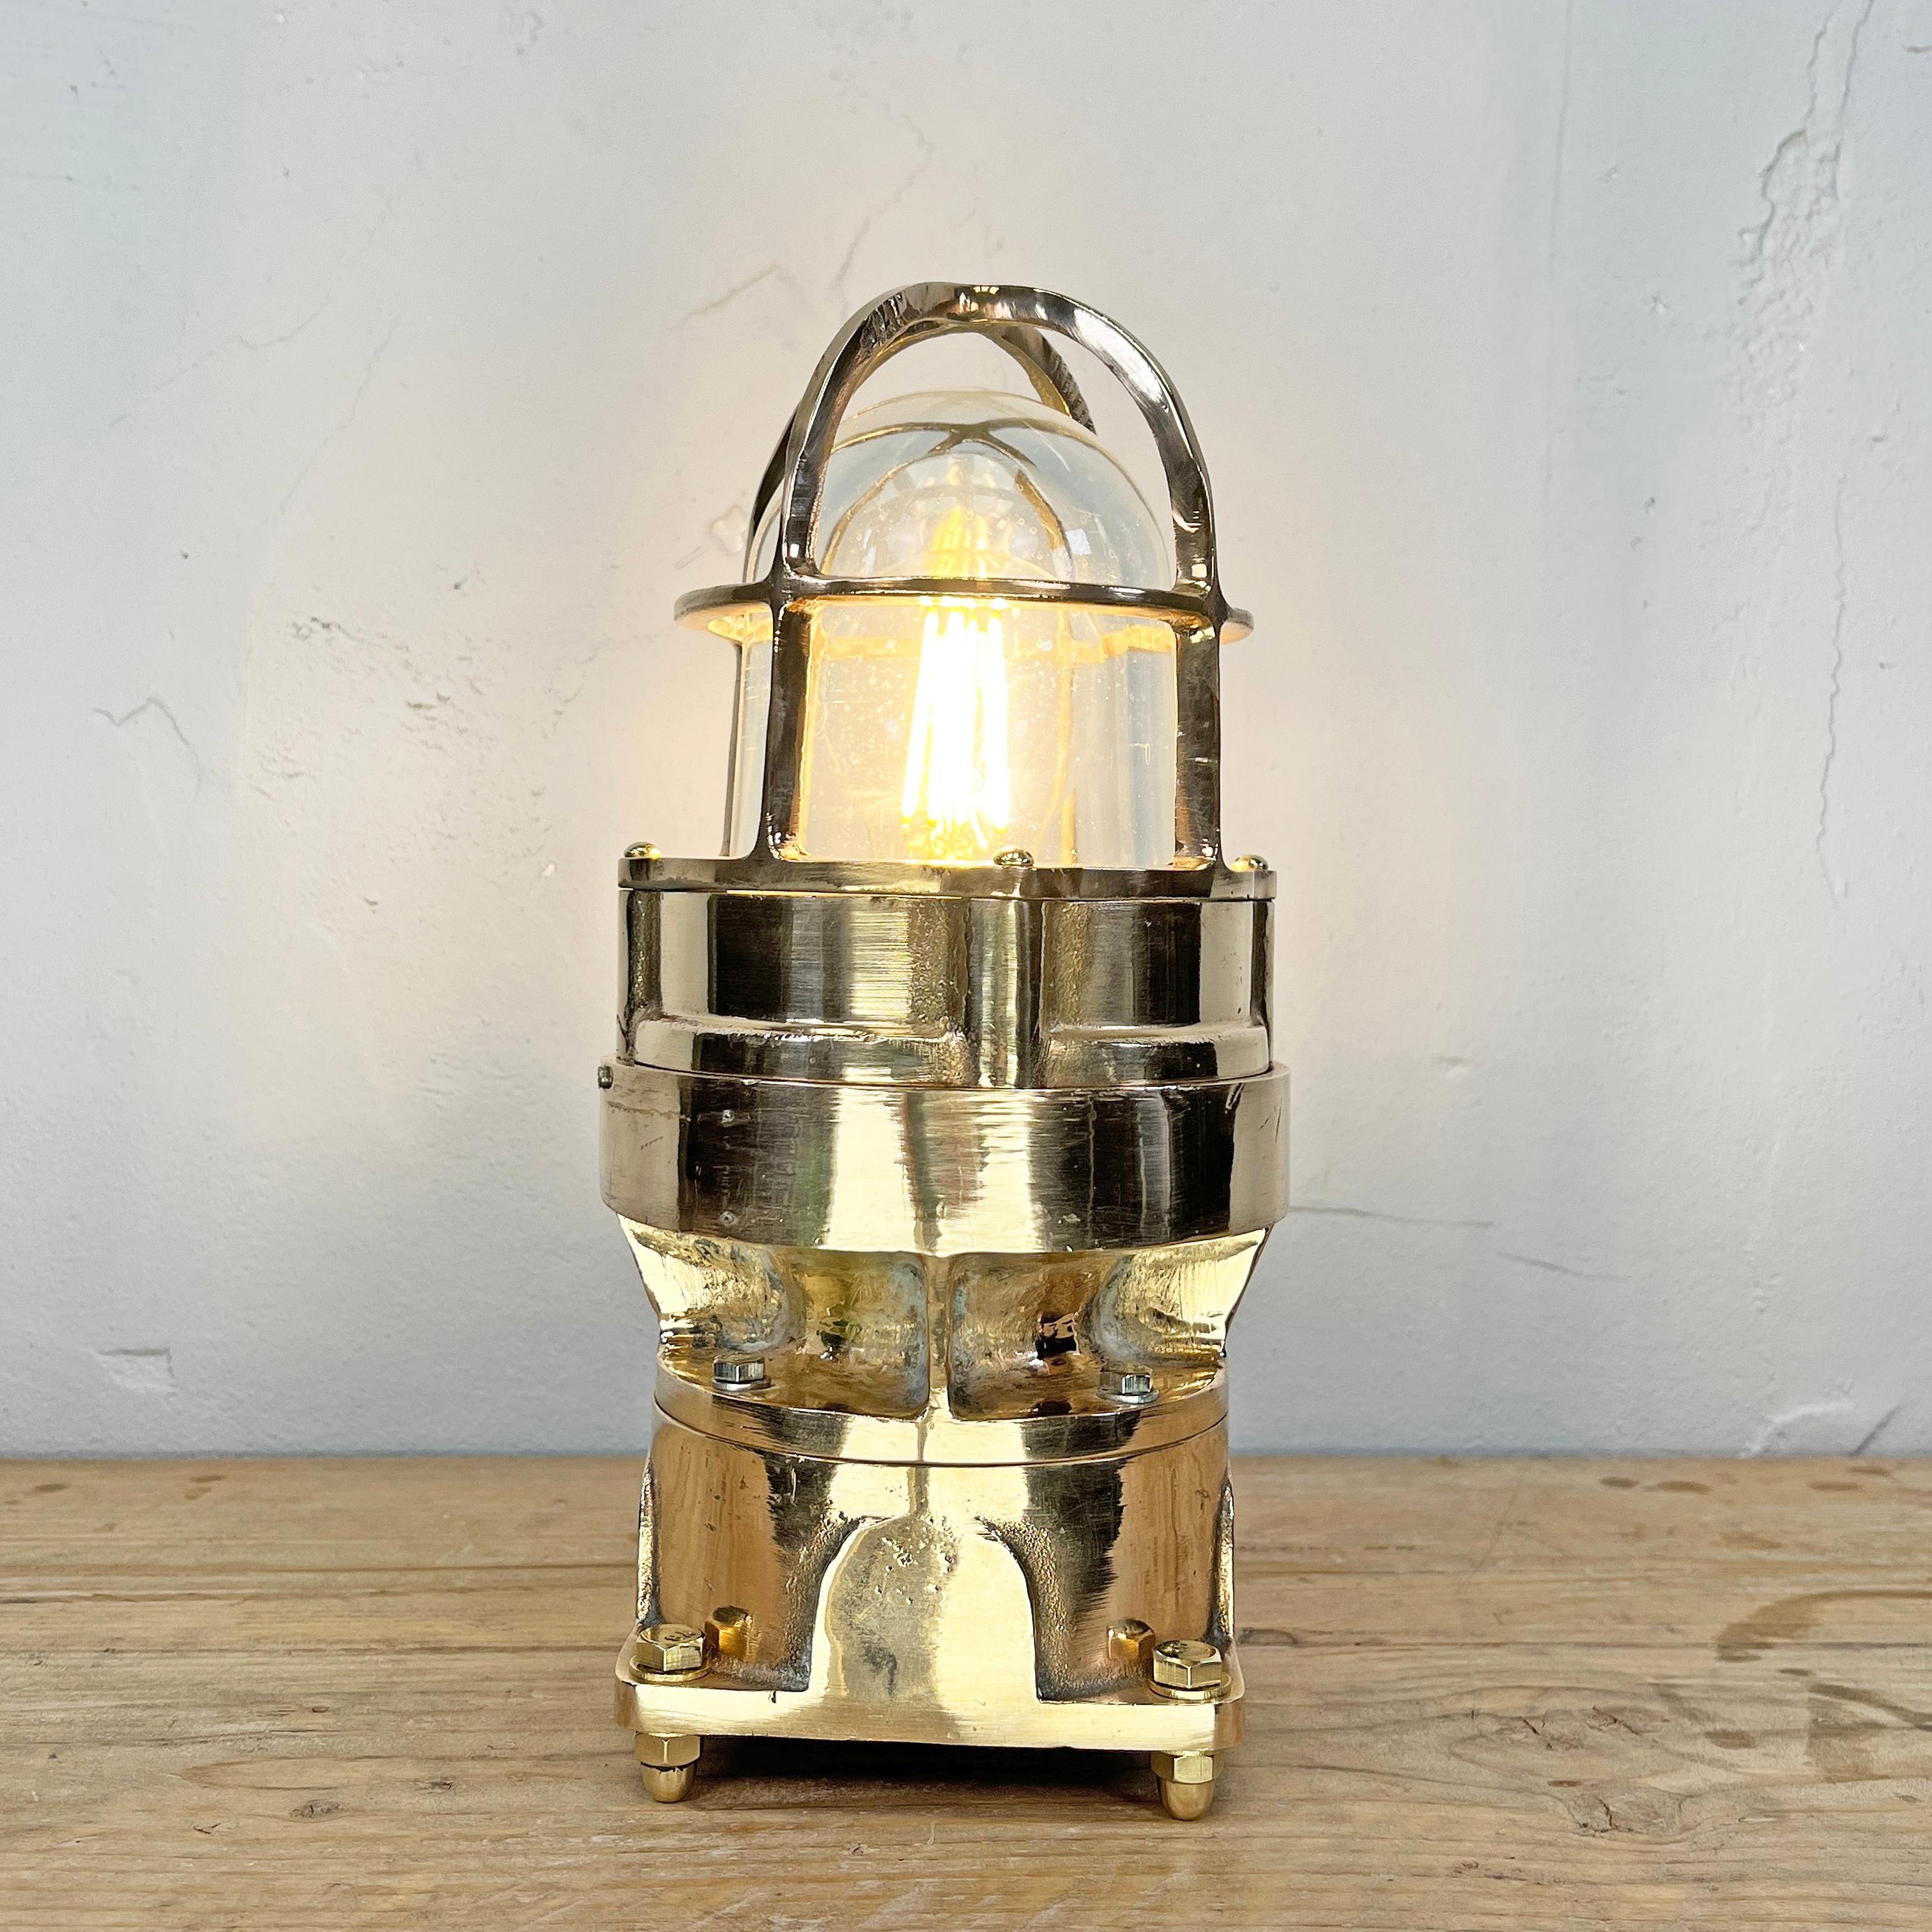 A robust bronze industrial outdoor light reclaimed from decommissioned cargo ships and adapted for decorative use. This is a vintage industrial lamp is made by the American company Pauluhn Electric Manufacturing. We have professionally restored this